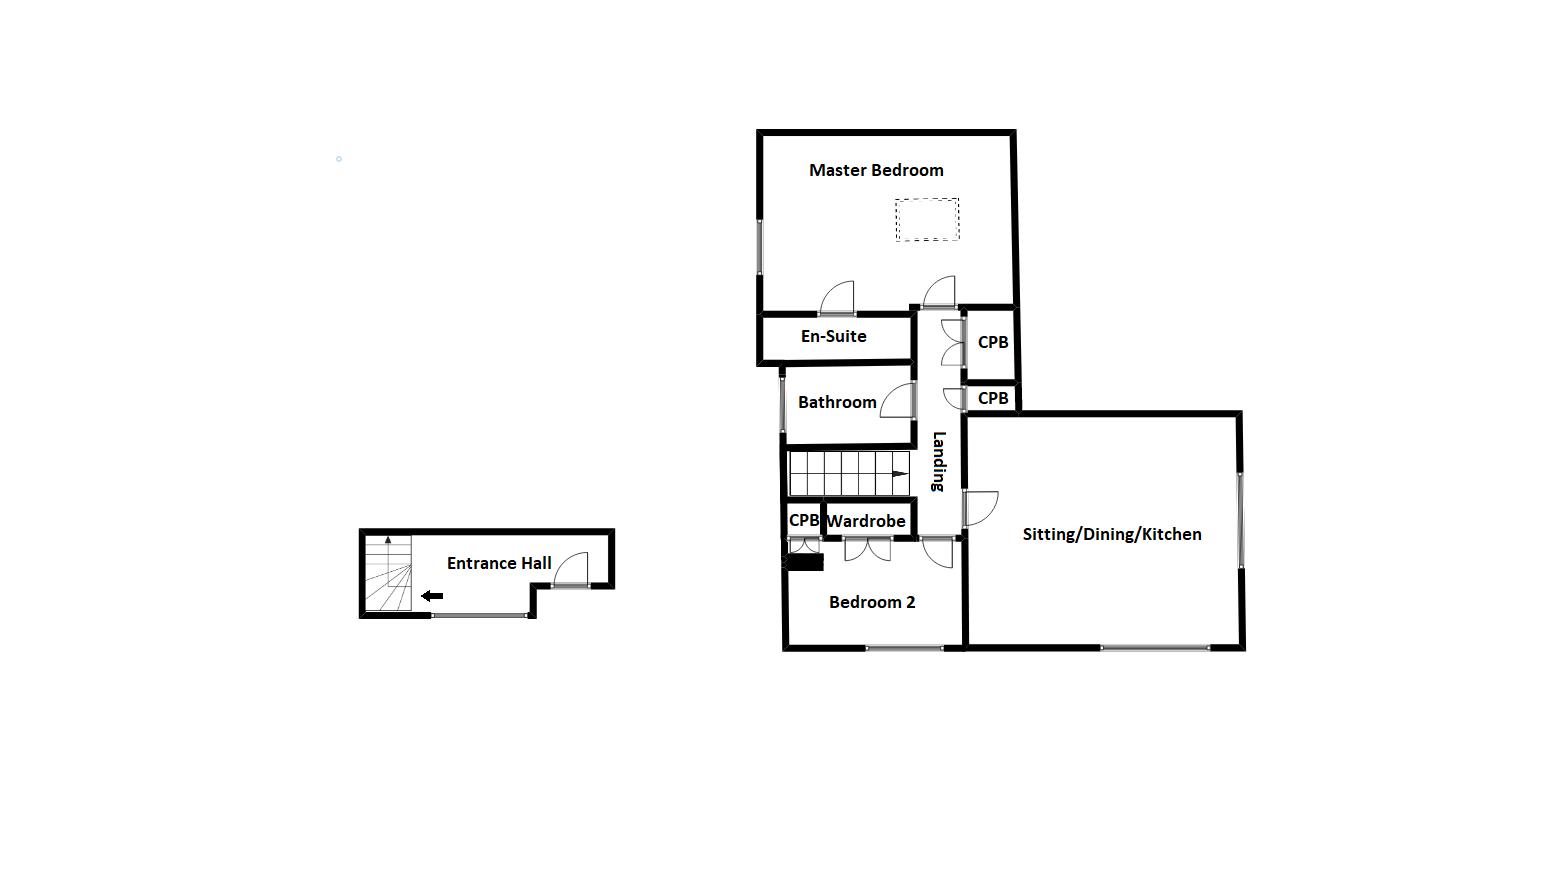 2 bed  to rent in South Petherton - Property Floorplan